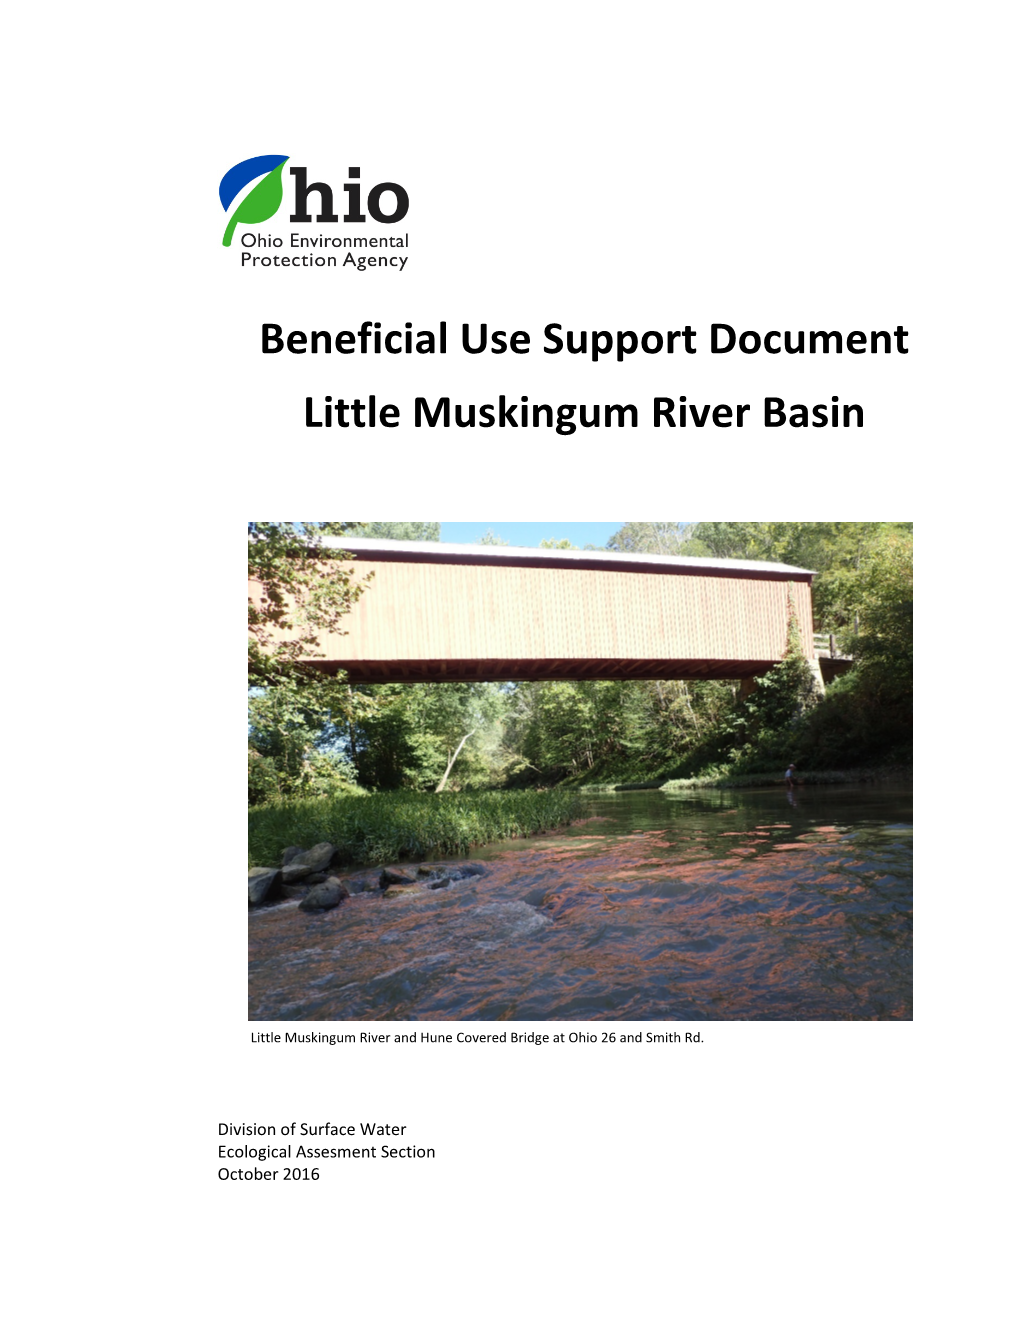 Beneficial Use Support Document Little Muskingum River Basin